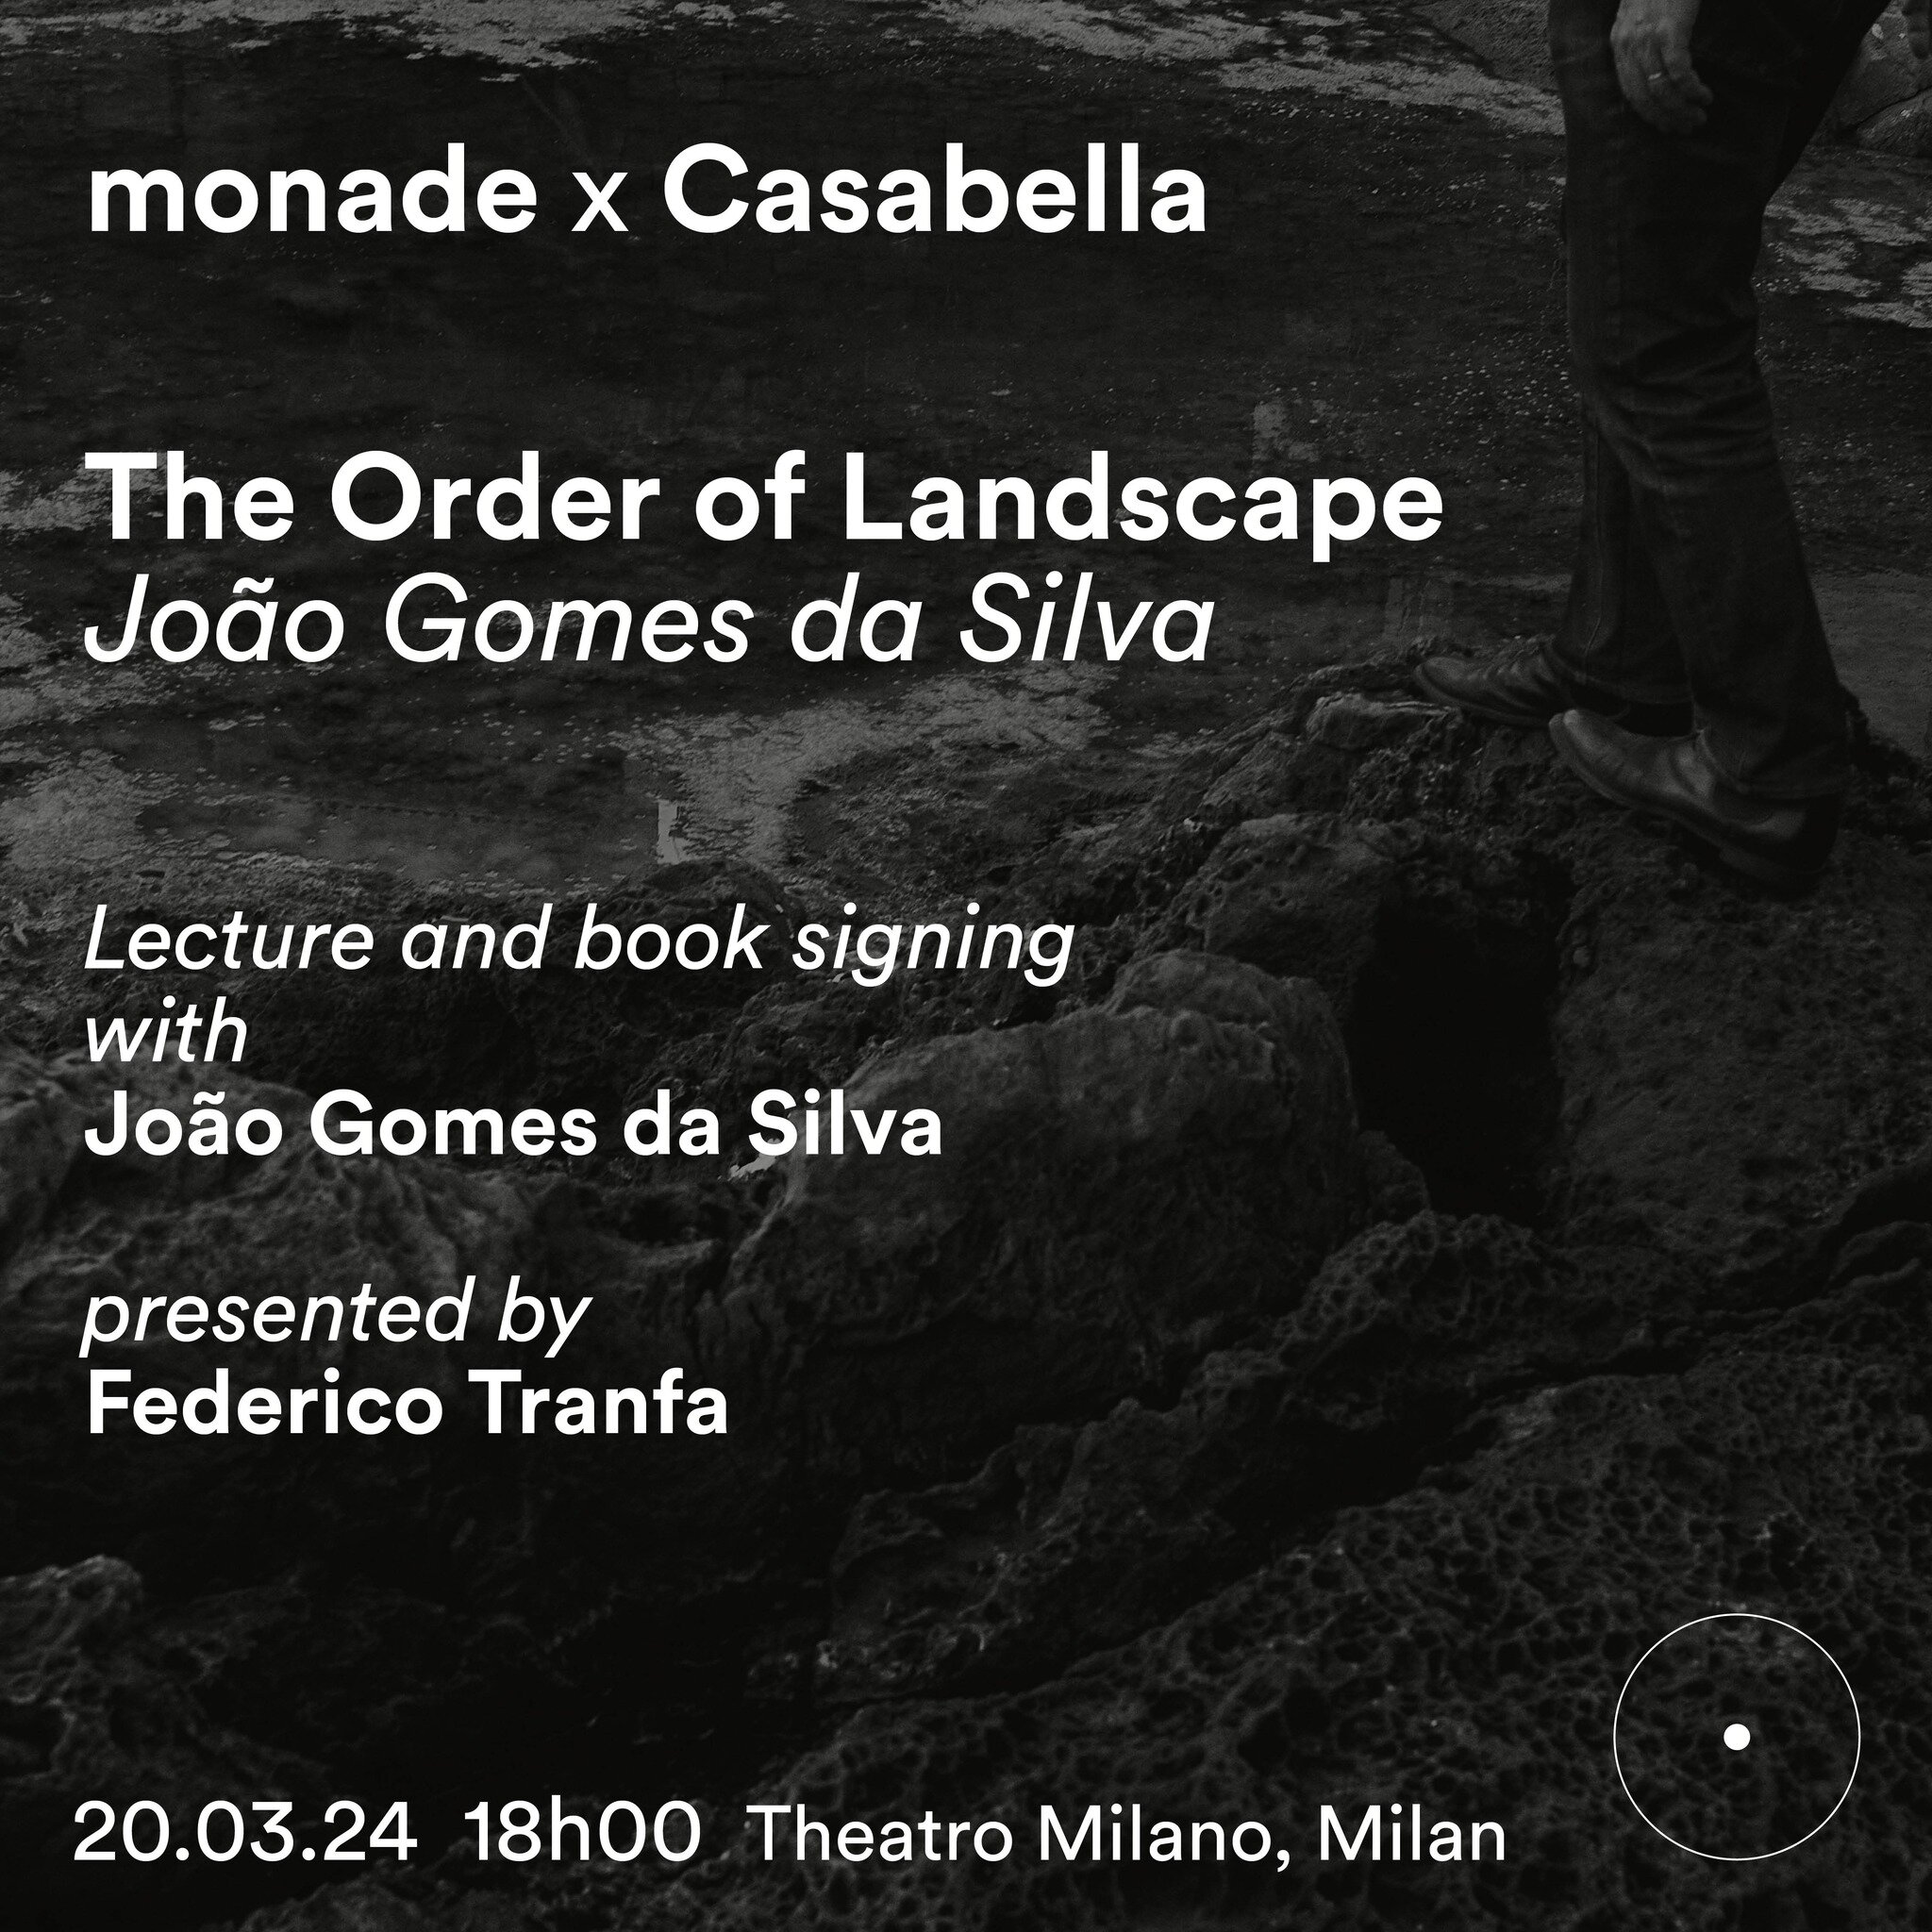 MONADE X Casabella
@casabella1928 

Join us in Milan on 20th March, 18h00, for a lecture and book signing by Jo&atilde;o Gomes da Silva, reflecting on his practice and marking the release of &quot;The Order of Landscape&quot;. 

Lecture and book sign